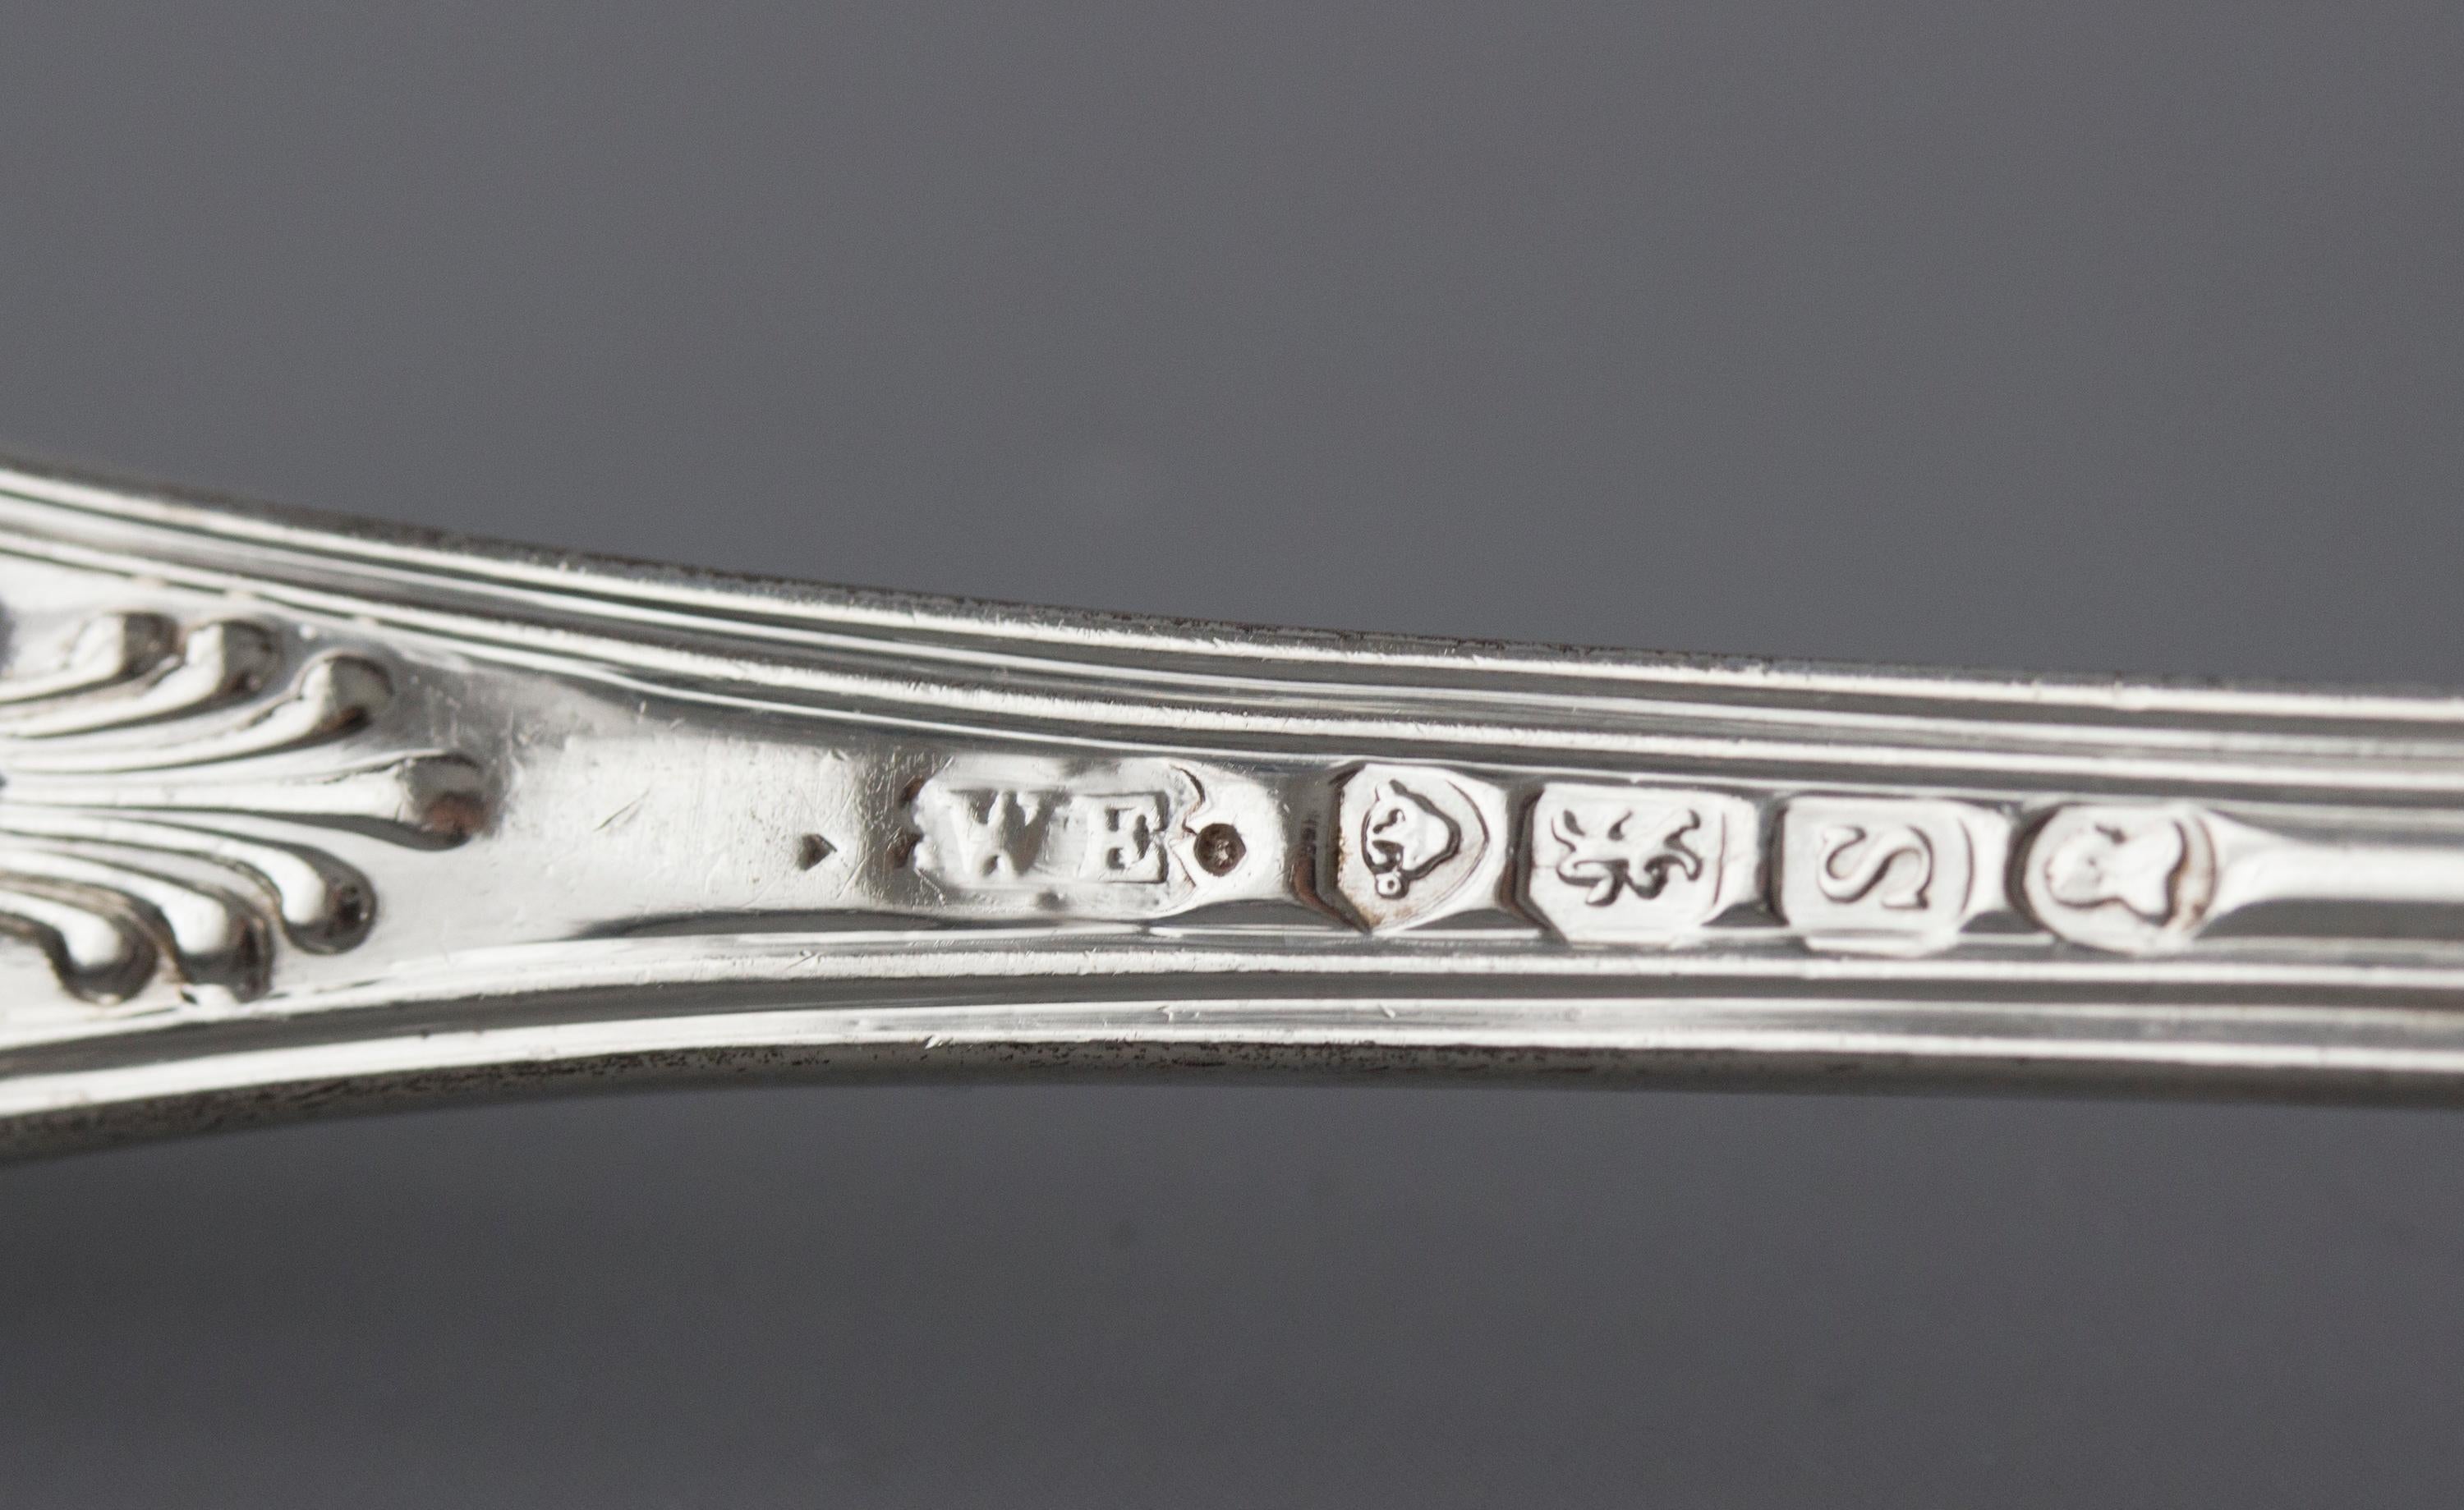 Mid-19th Century Pair of William IV Kings Pattern Sauce Ladles, London, 1834 by William Eaton